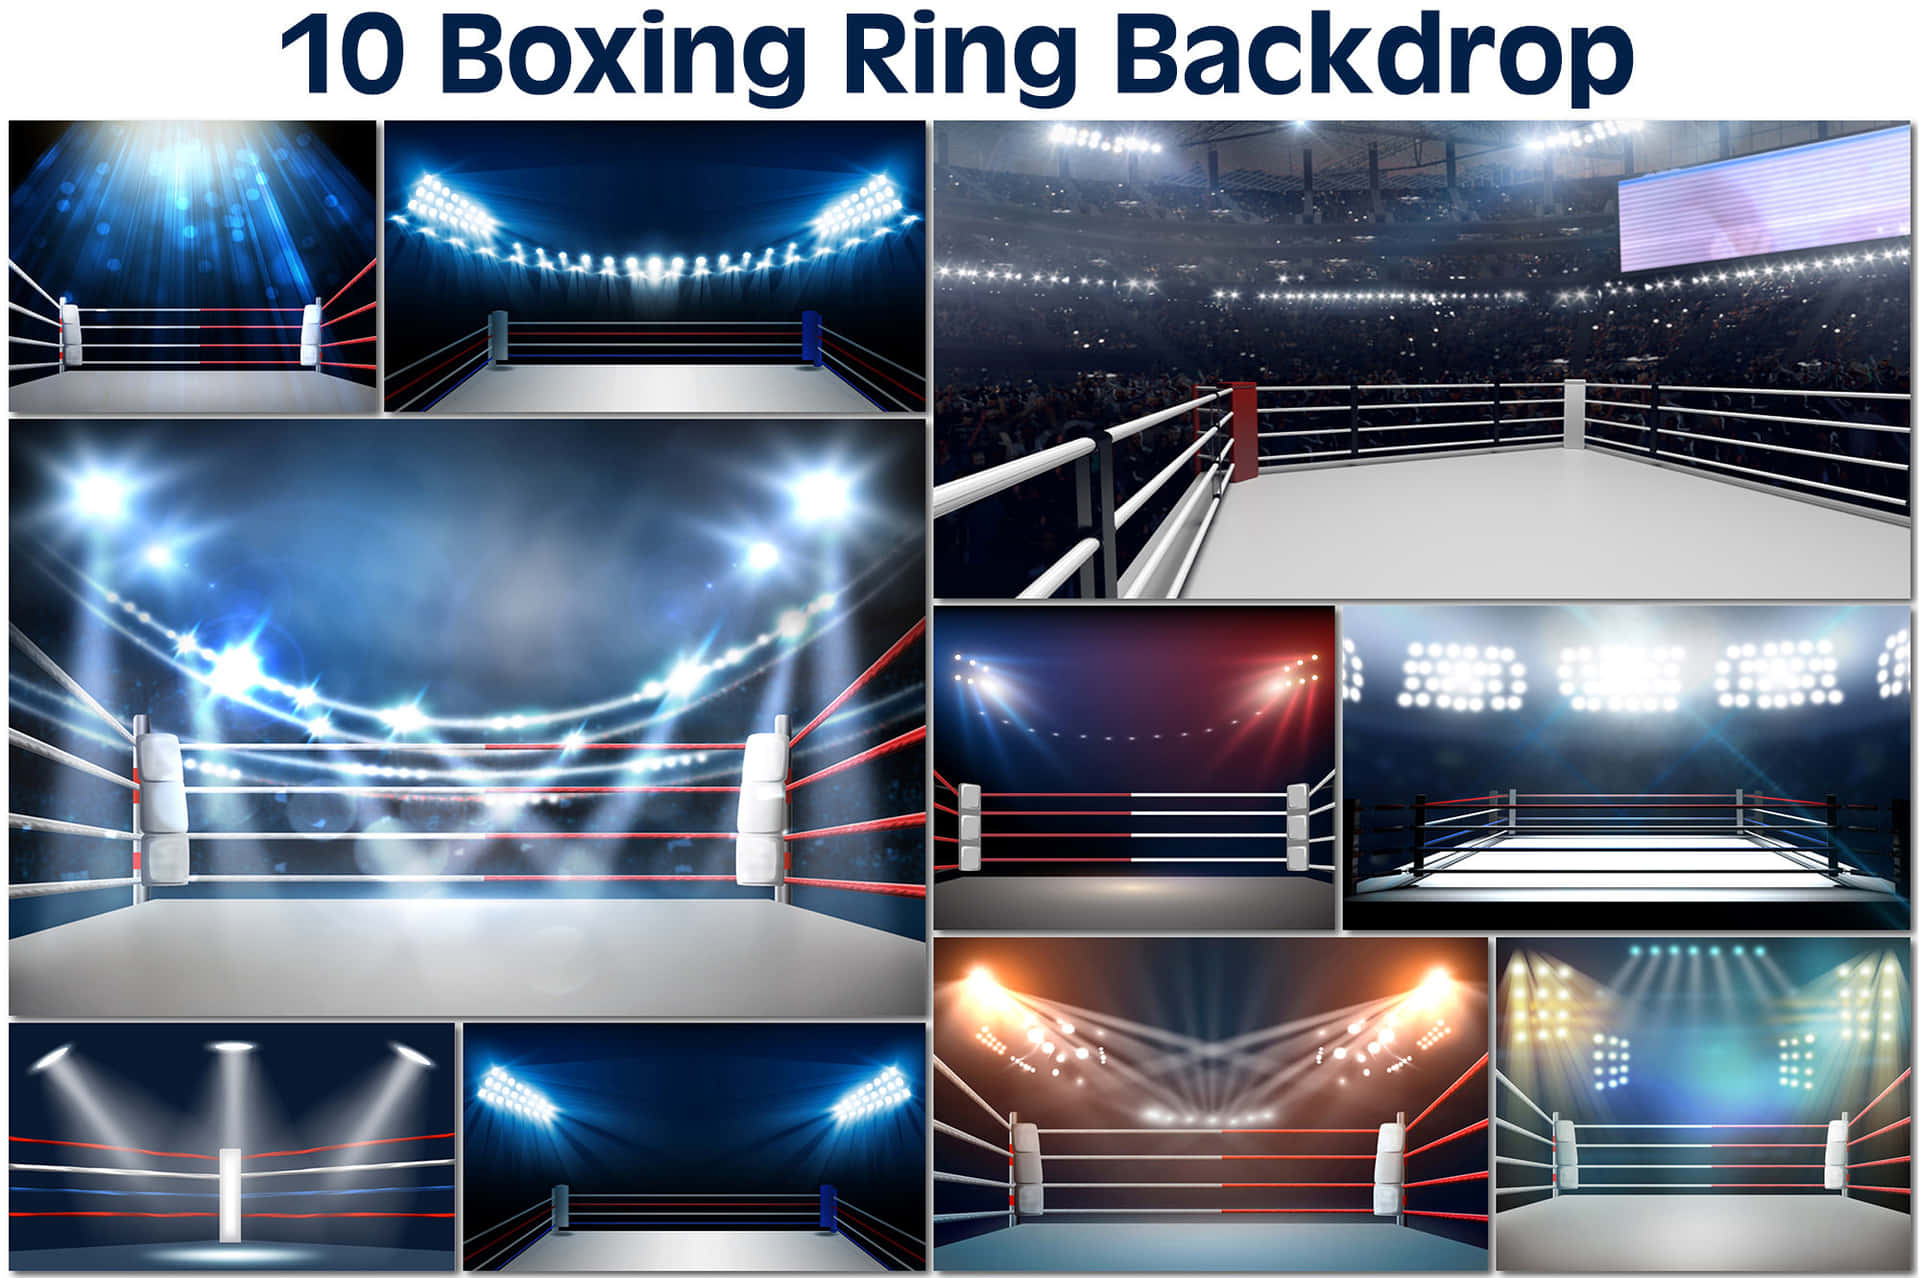 "Step Into the Ring and Take On the Challenges Ahead"